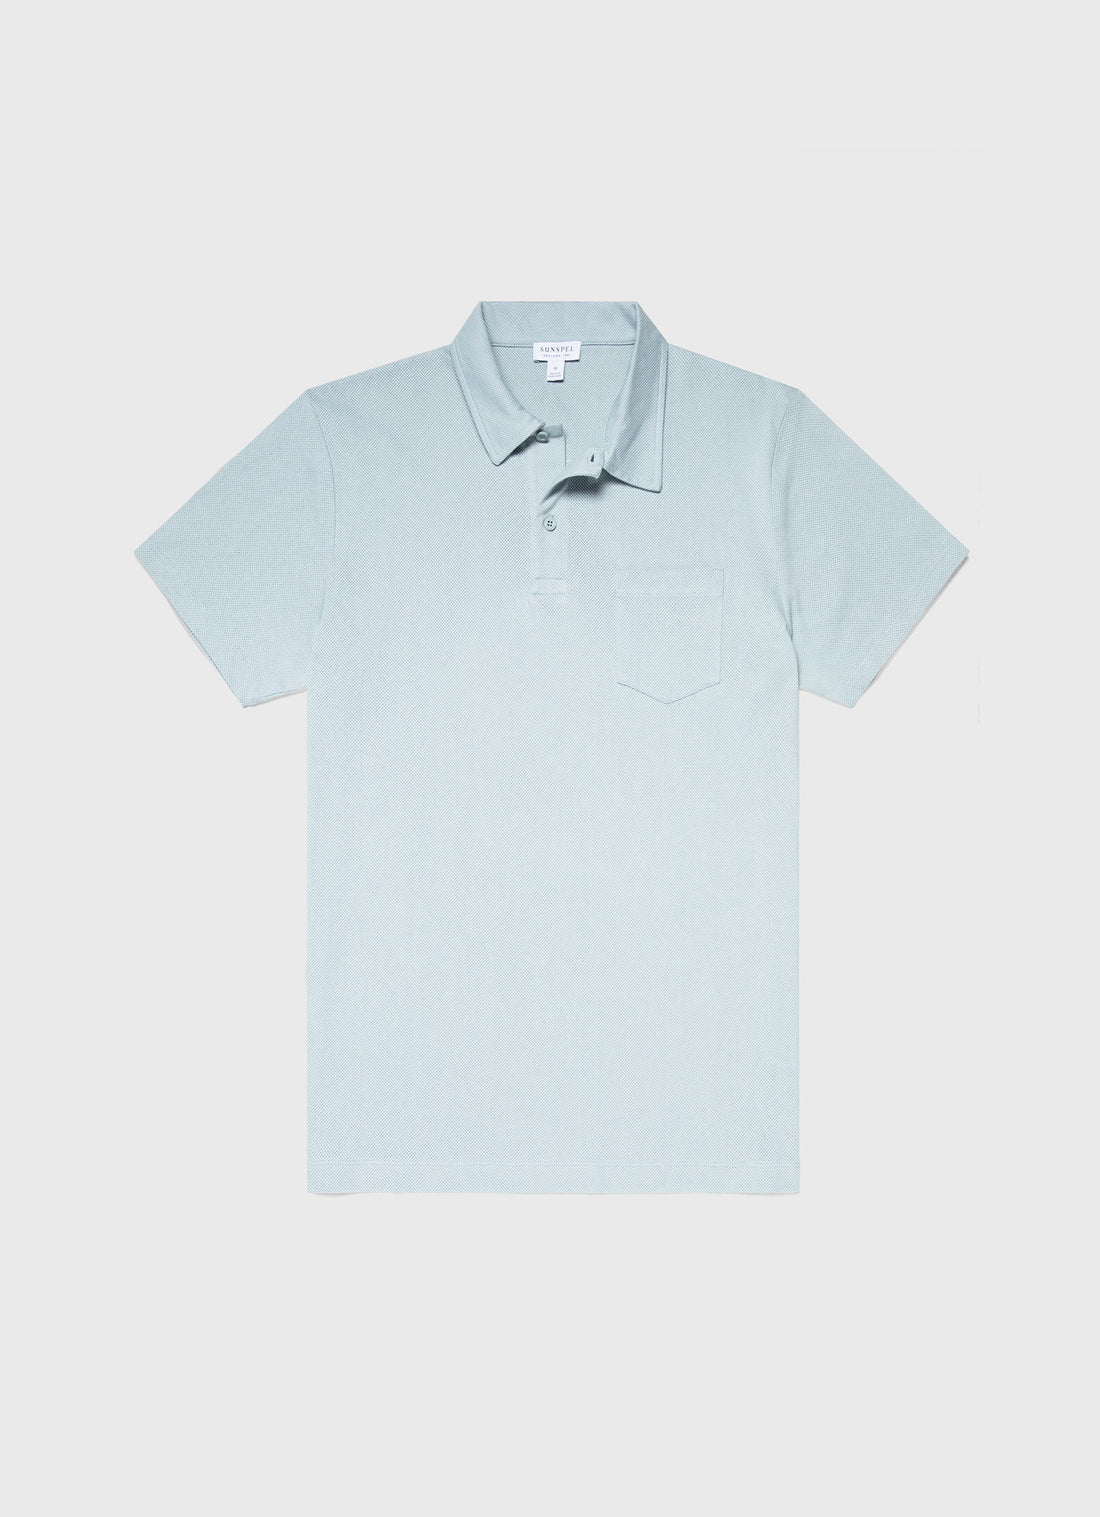 Men's Riviera Polo Shirt in Blue Sage